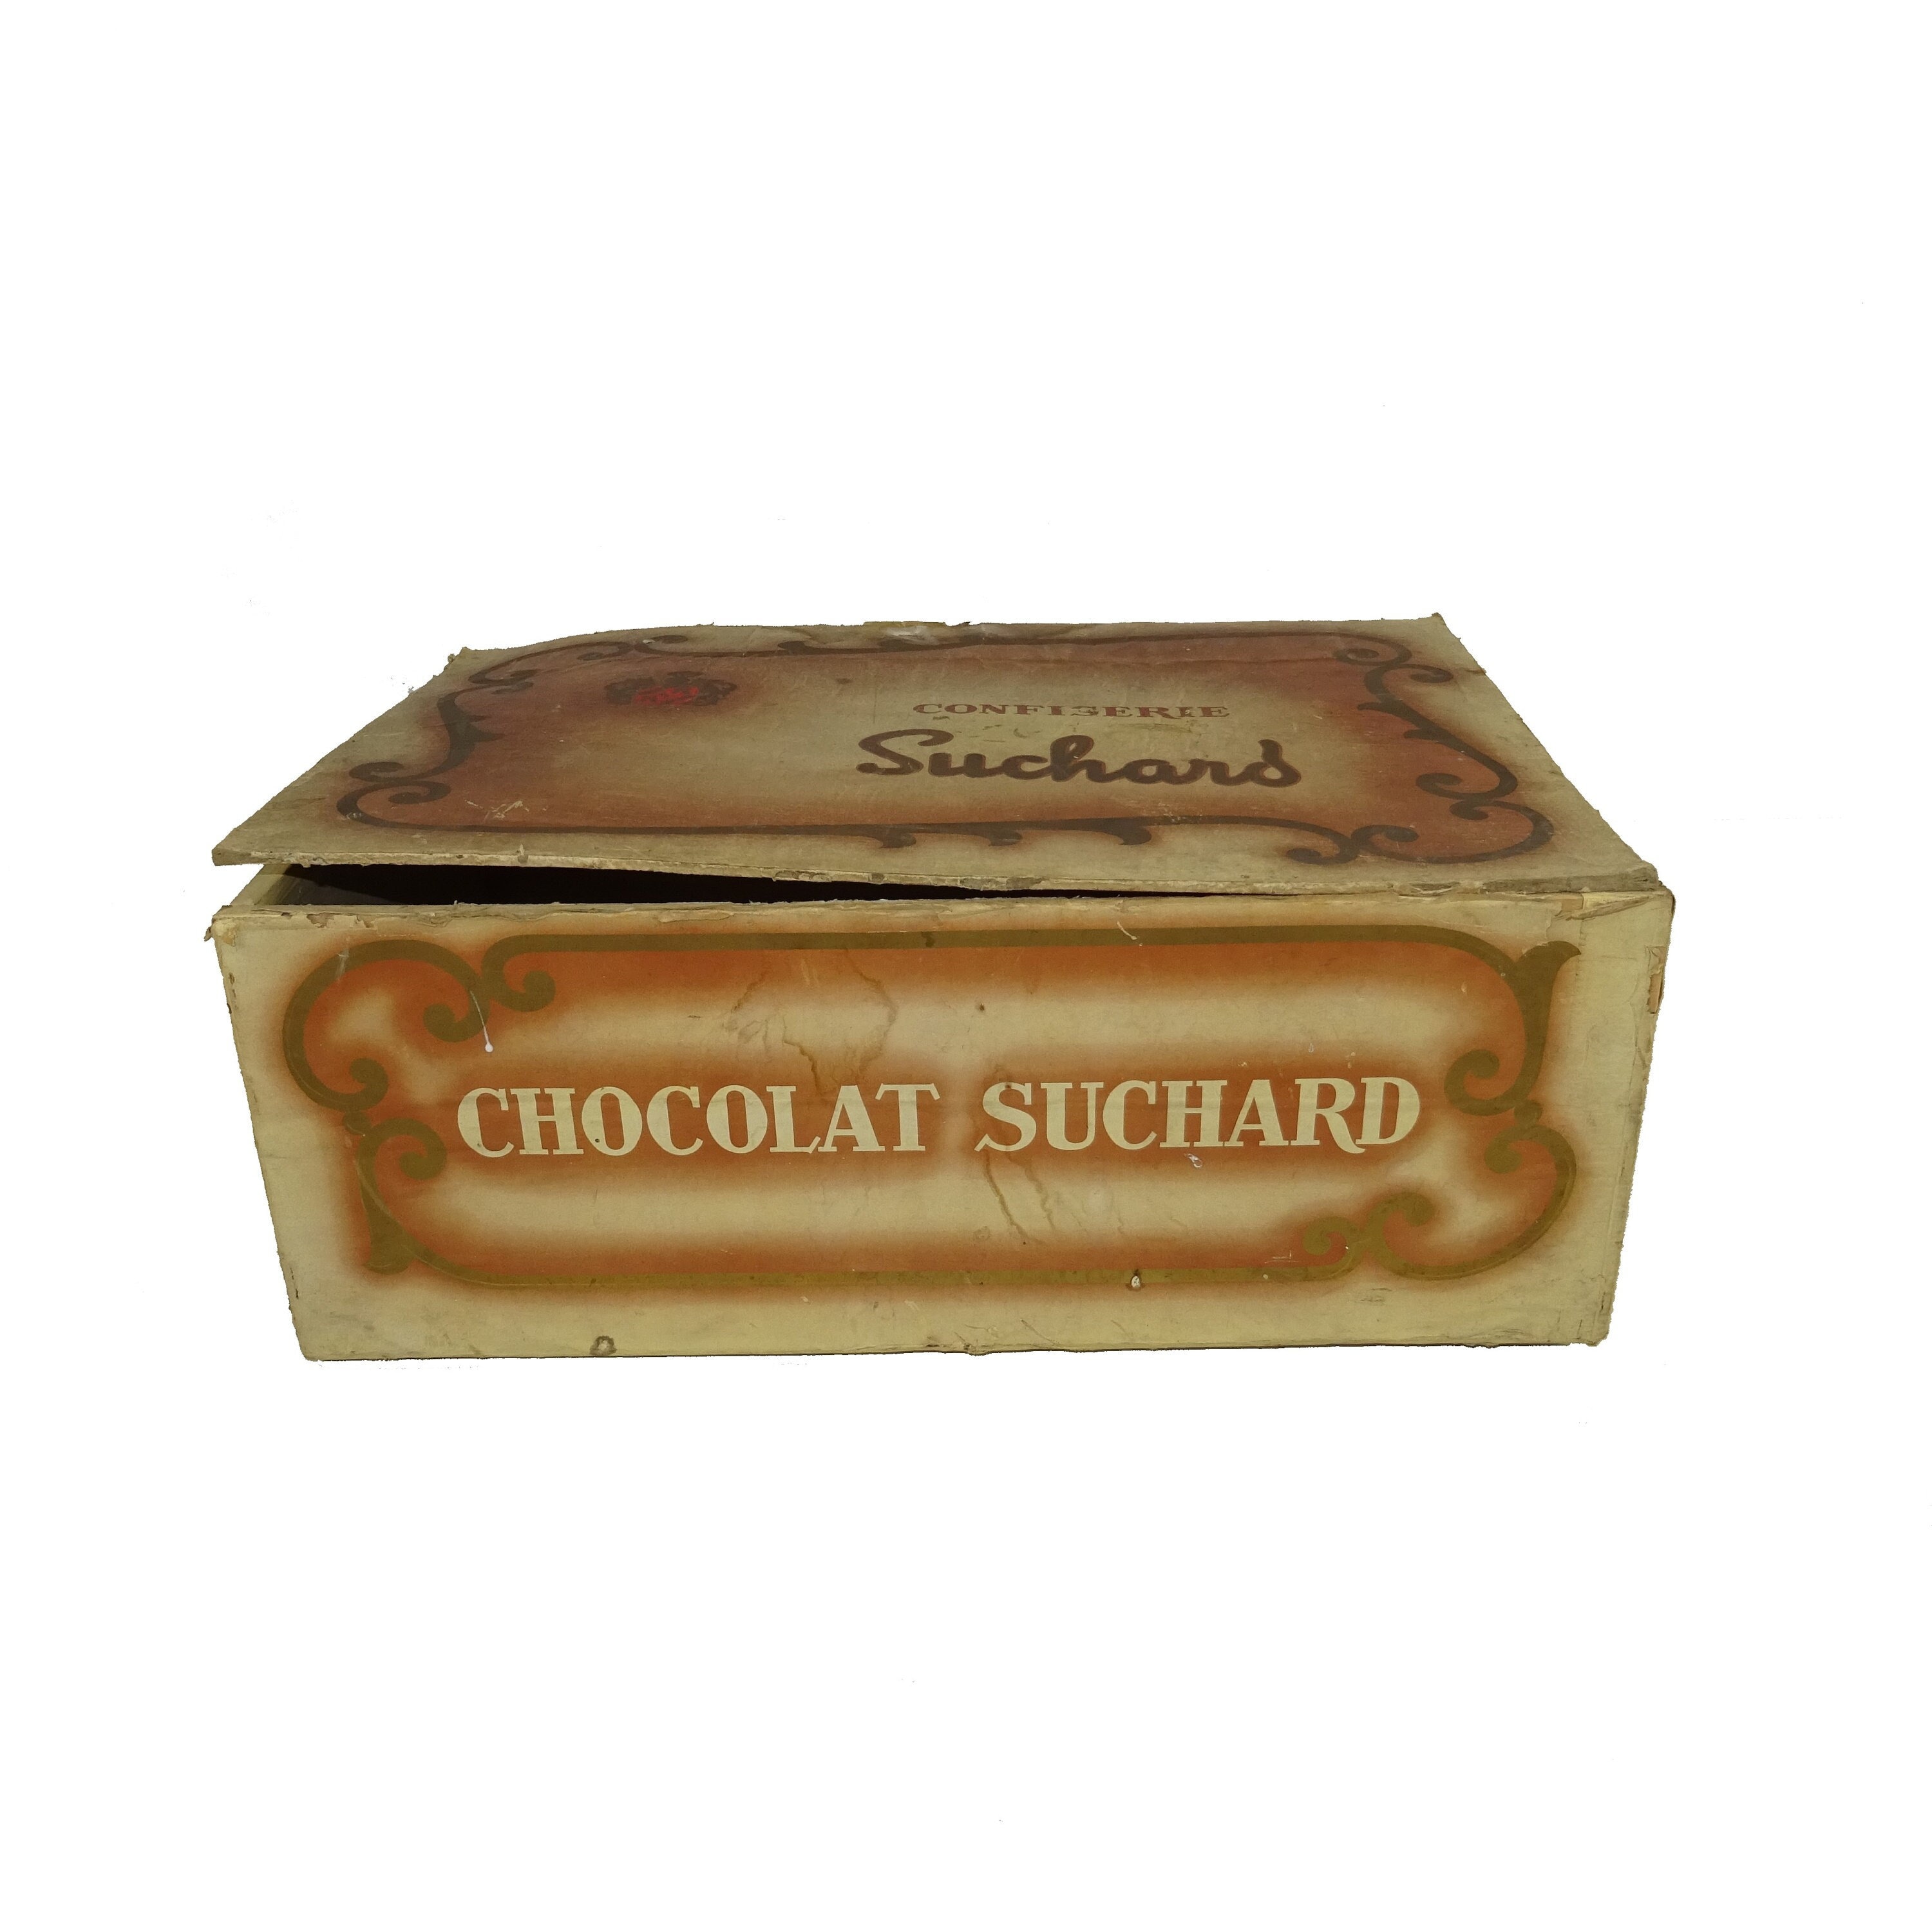 Chocolates Suchard Aida at a price of 9.99 lv. online 